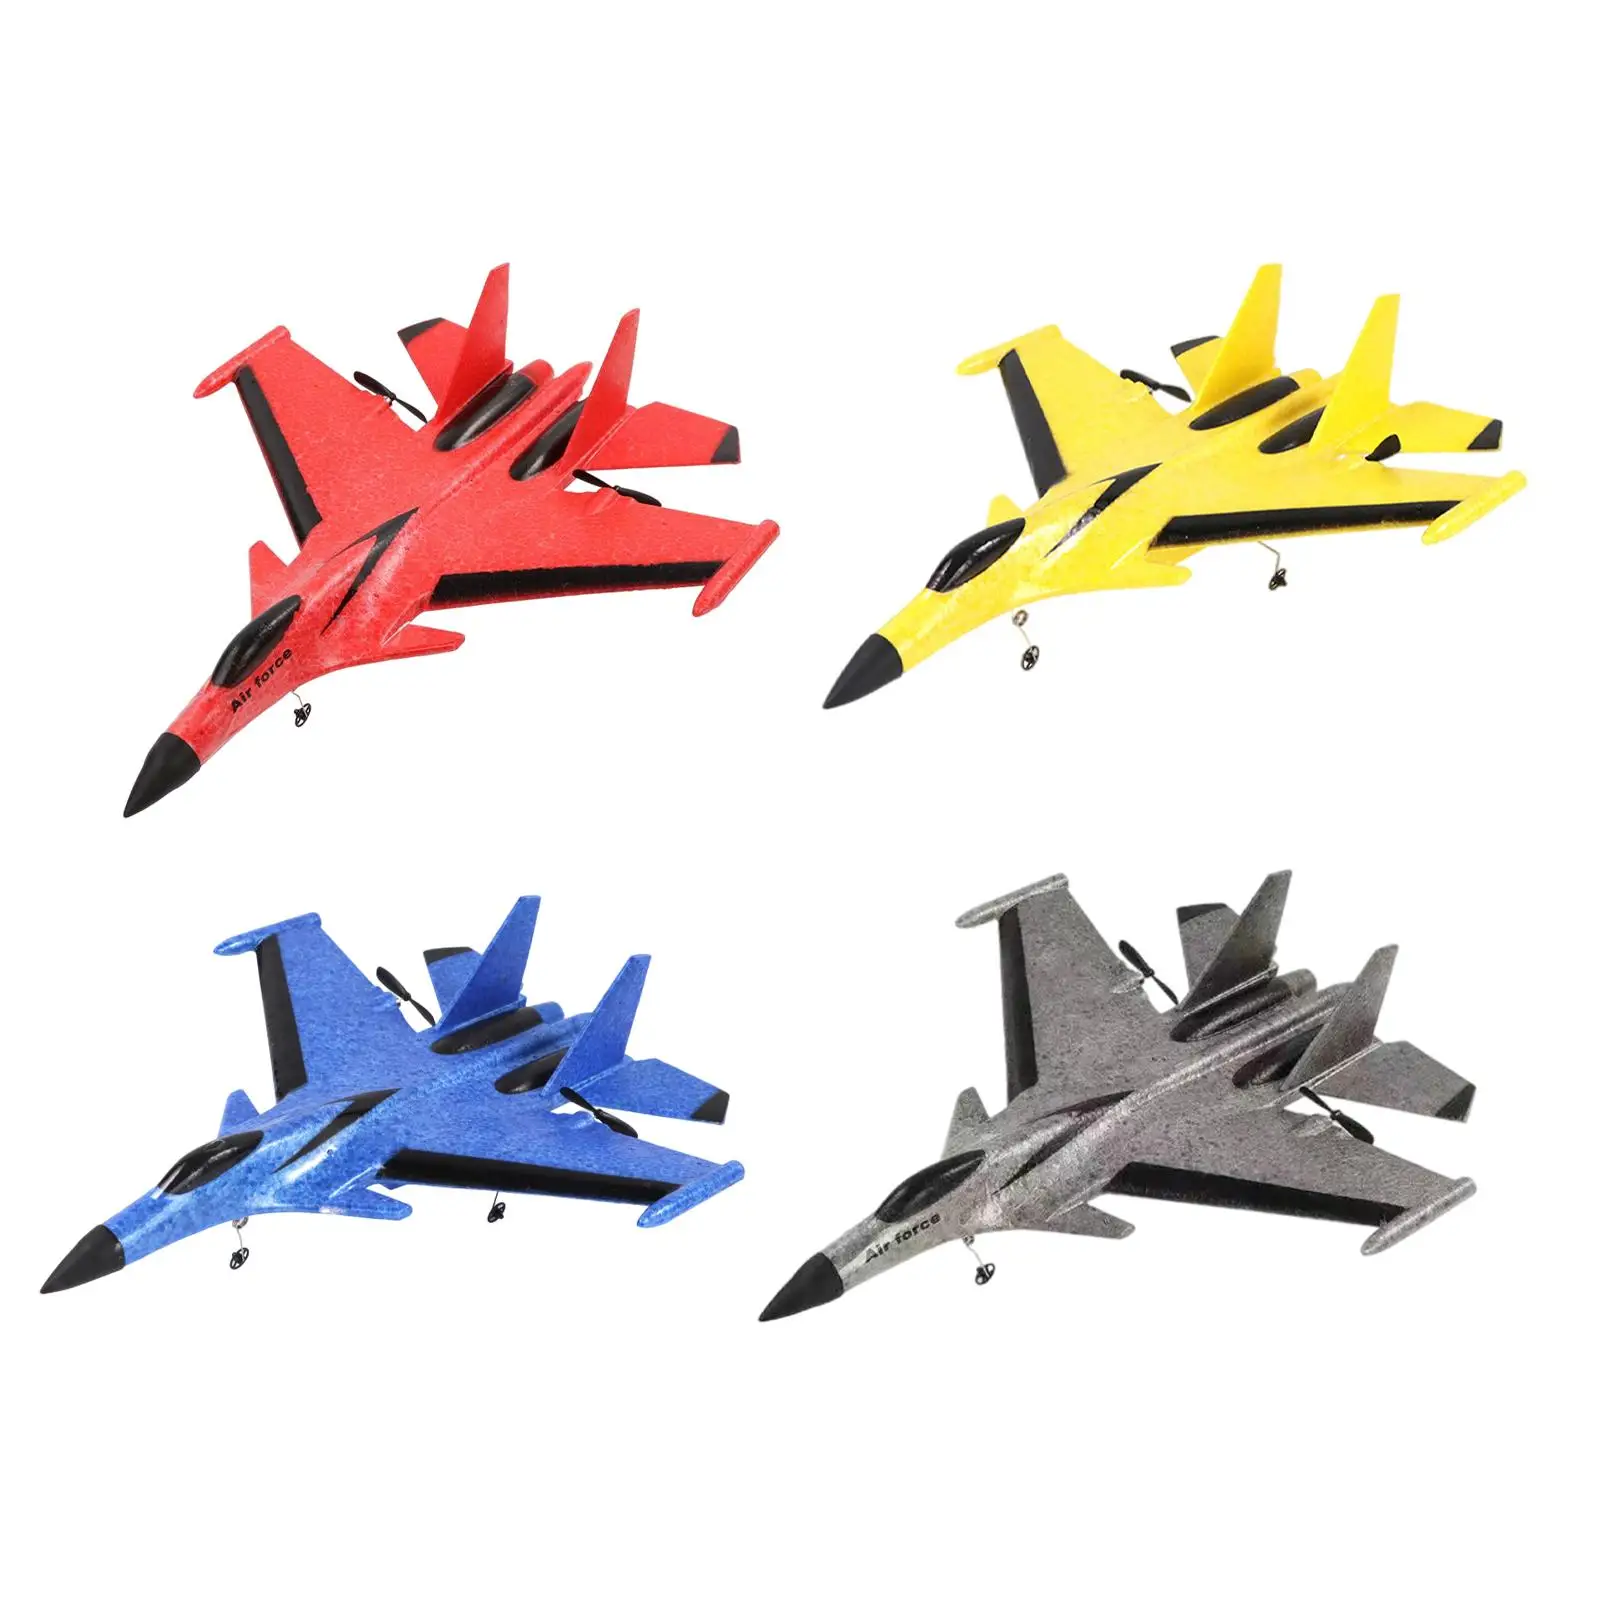 3 Channel EPP Foam RC Aircraft Plane Glider Easy to Control for Beginner RTF